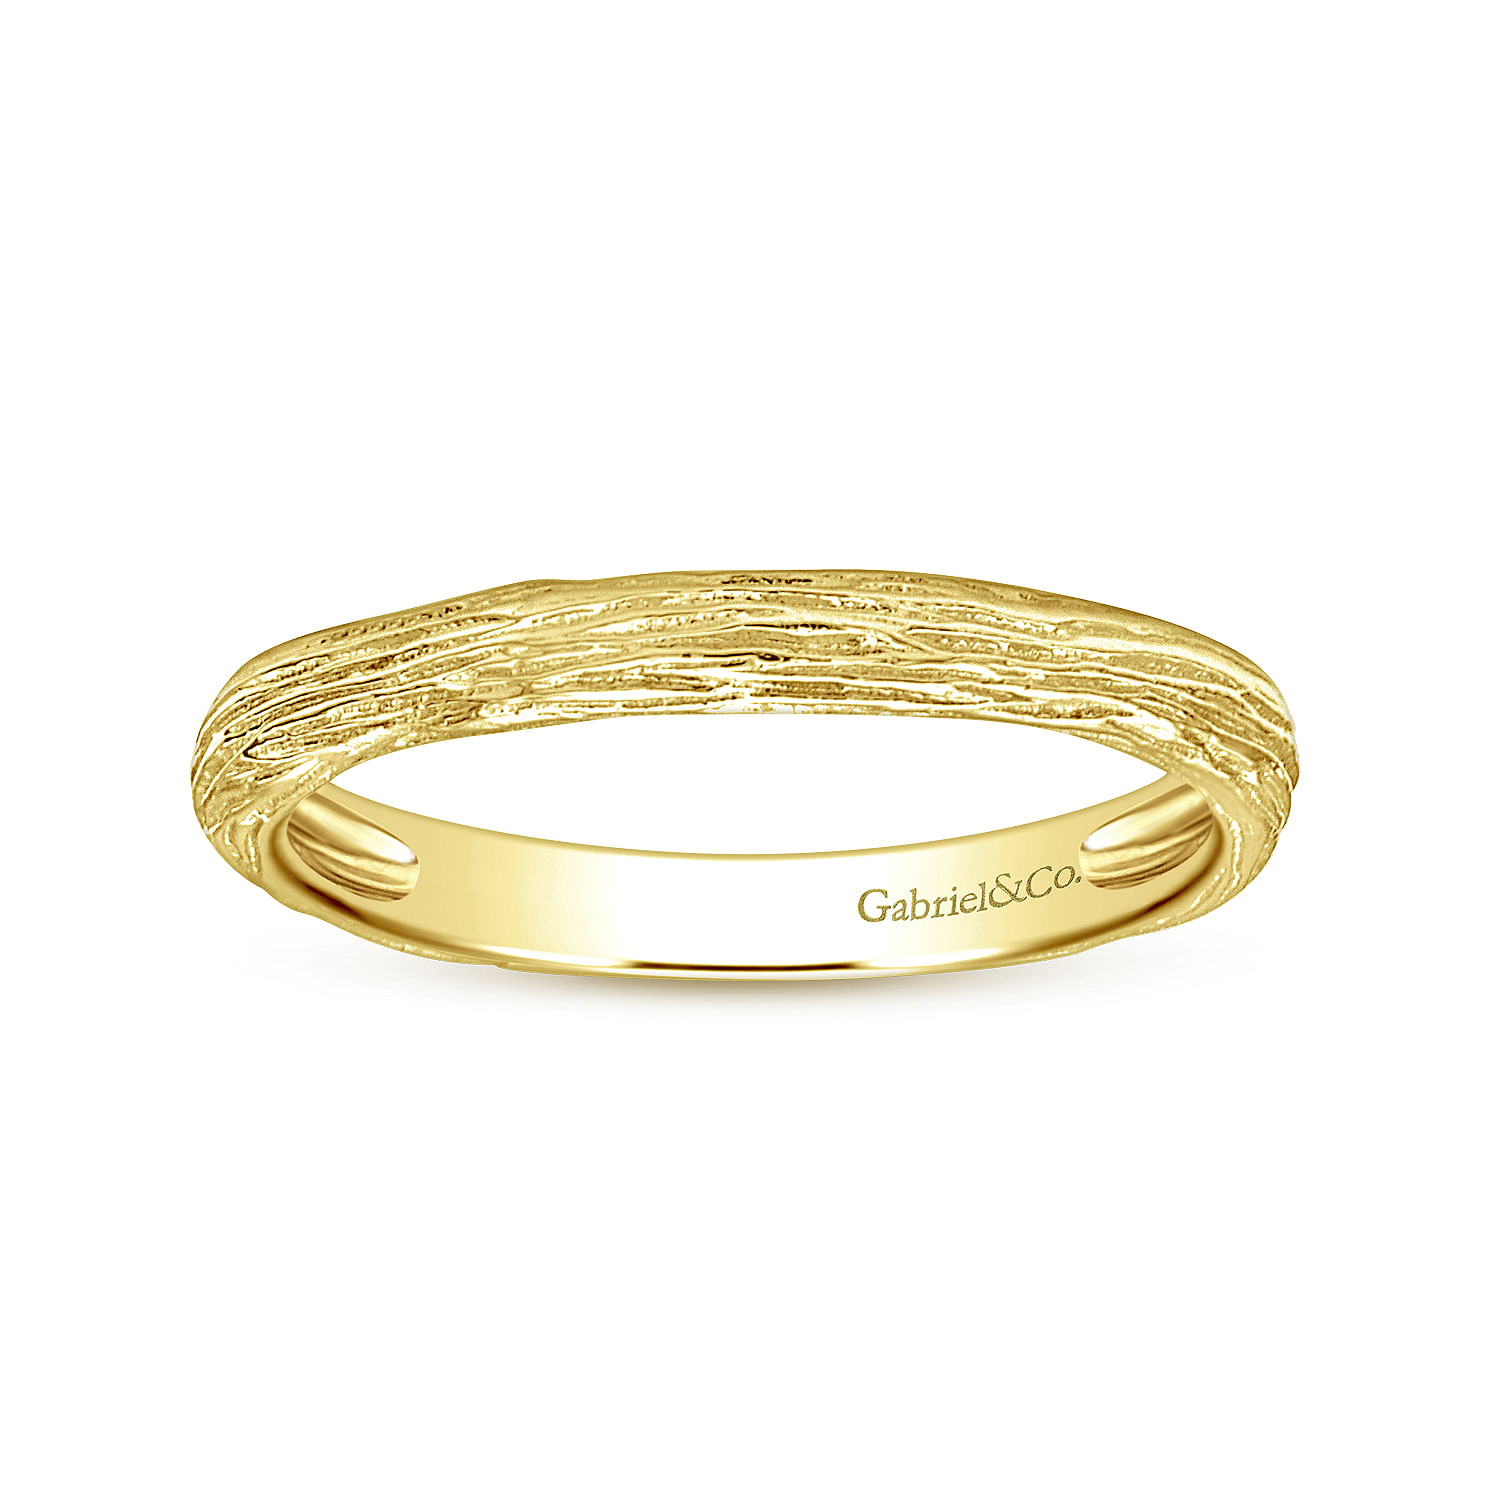 14K Yellow Gold Brushed Textured Stackable Ring